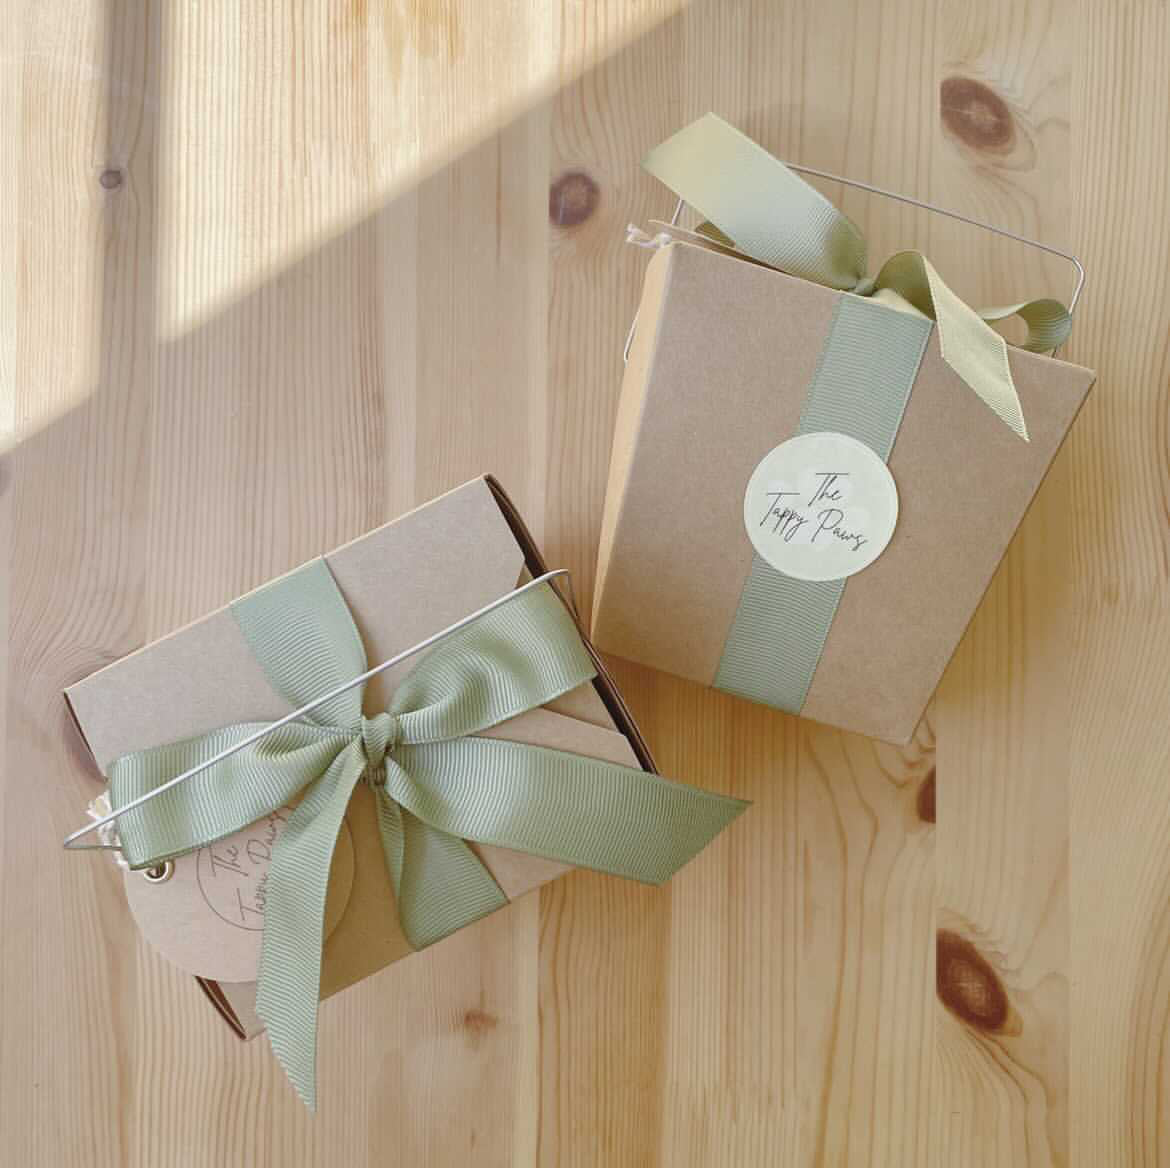 SAMPLE BOXES